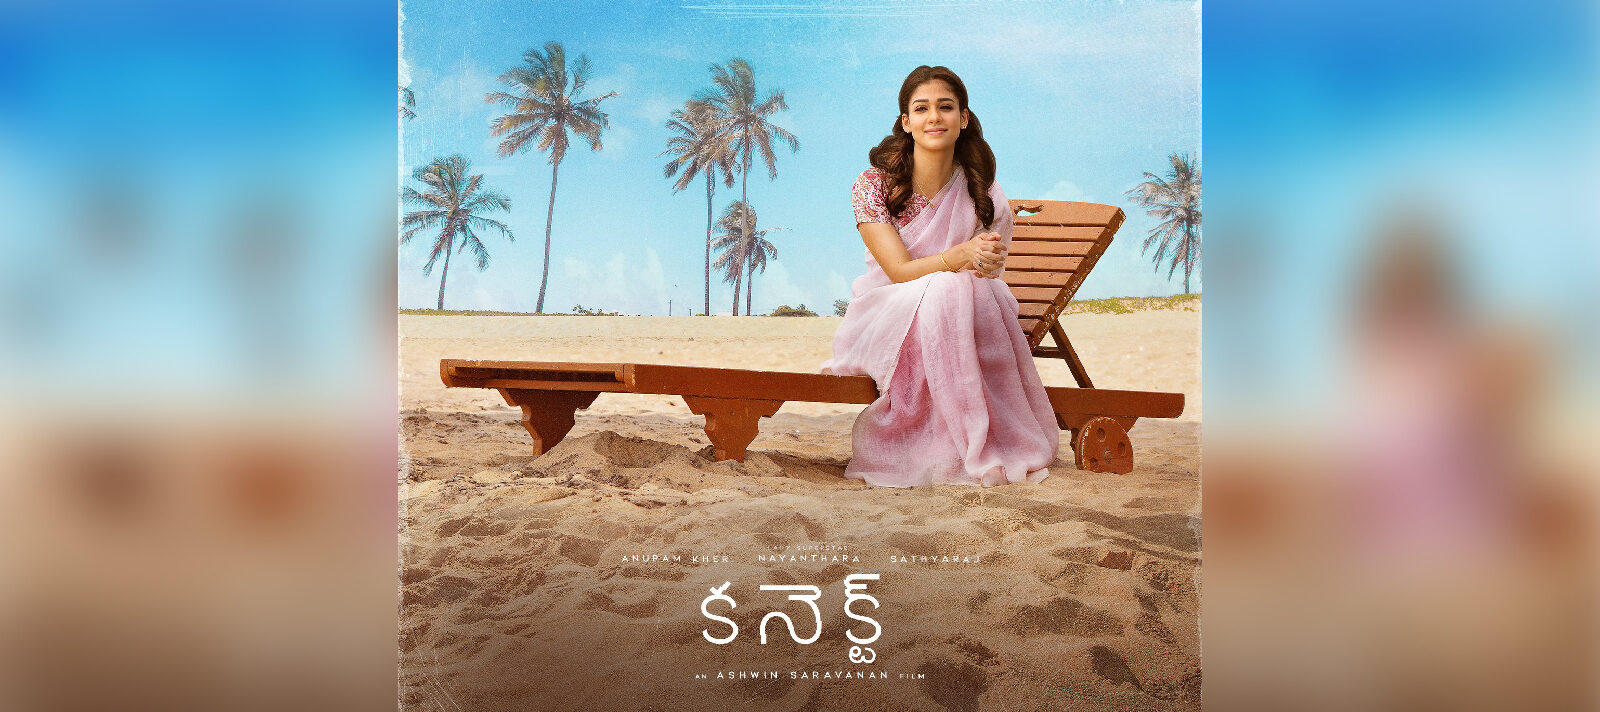 Nayanthara connect movie review